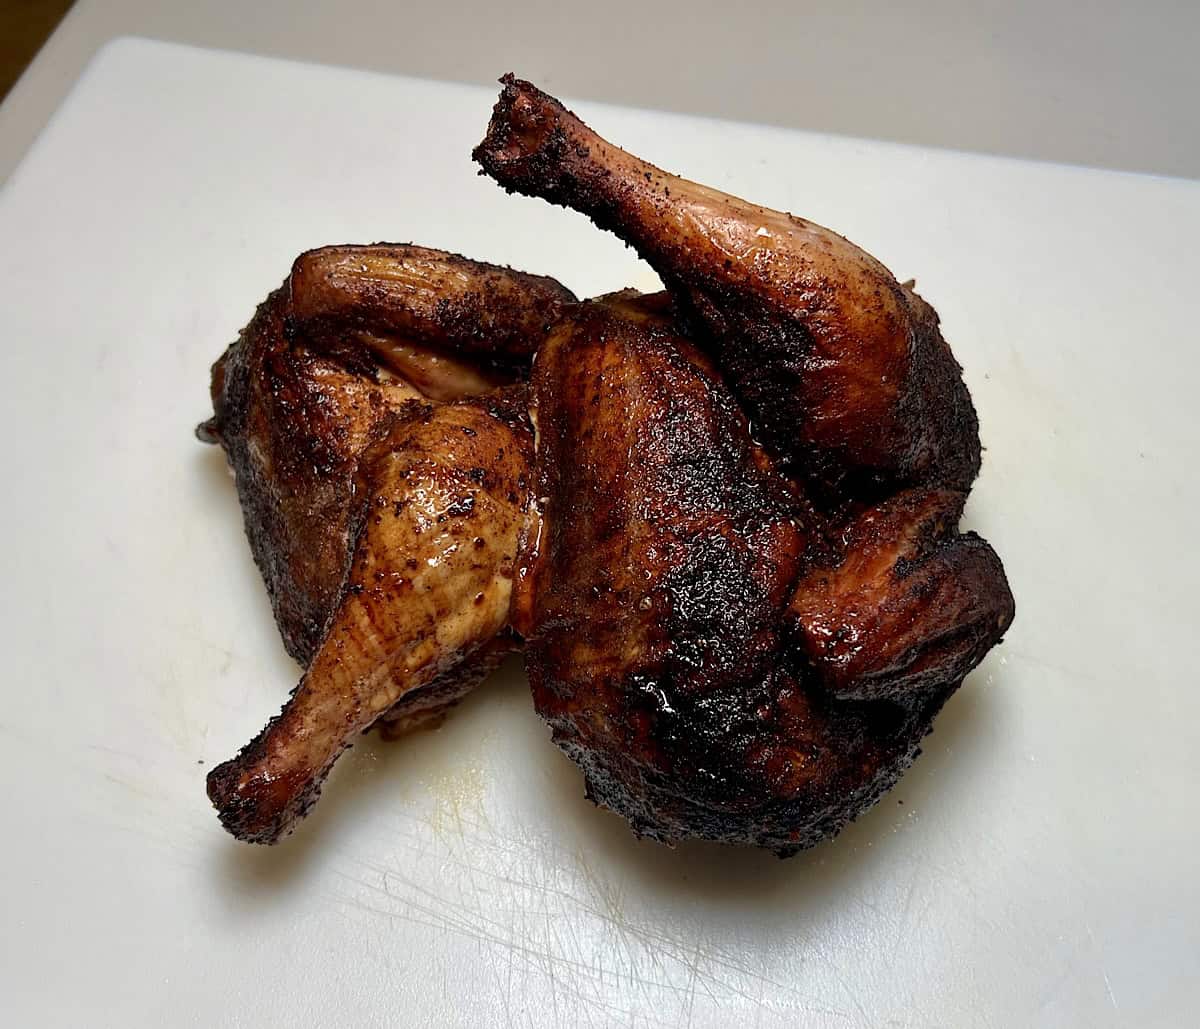 finished smoked chicken cut in half